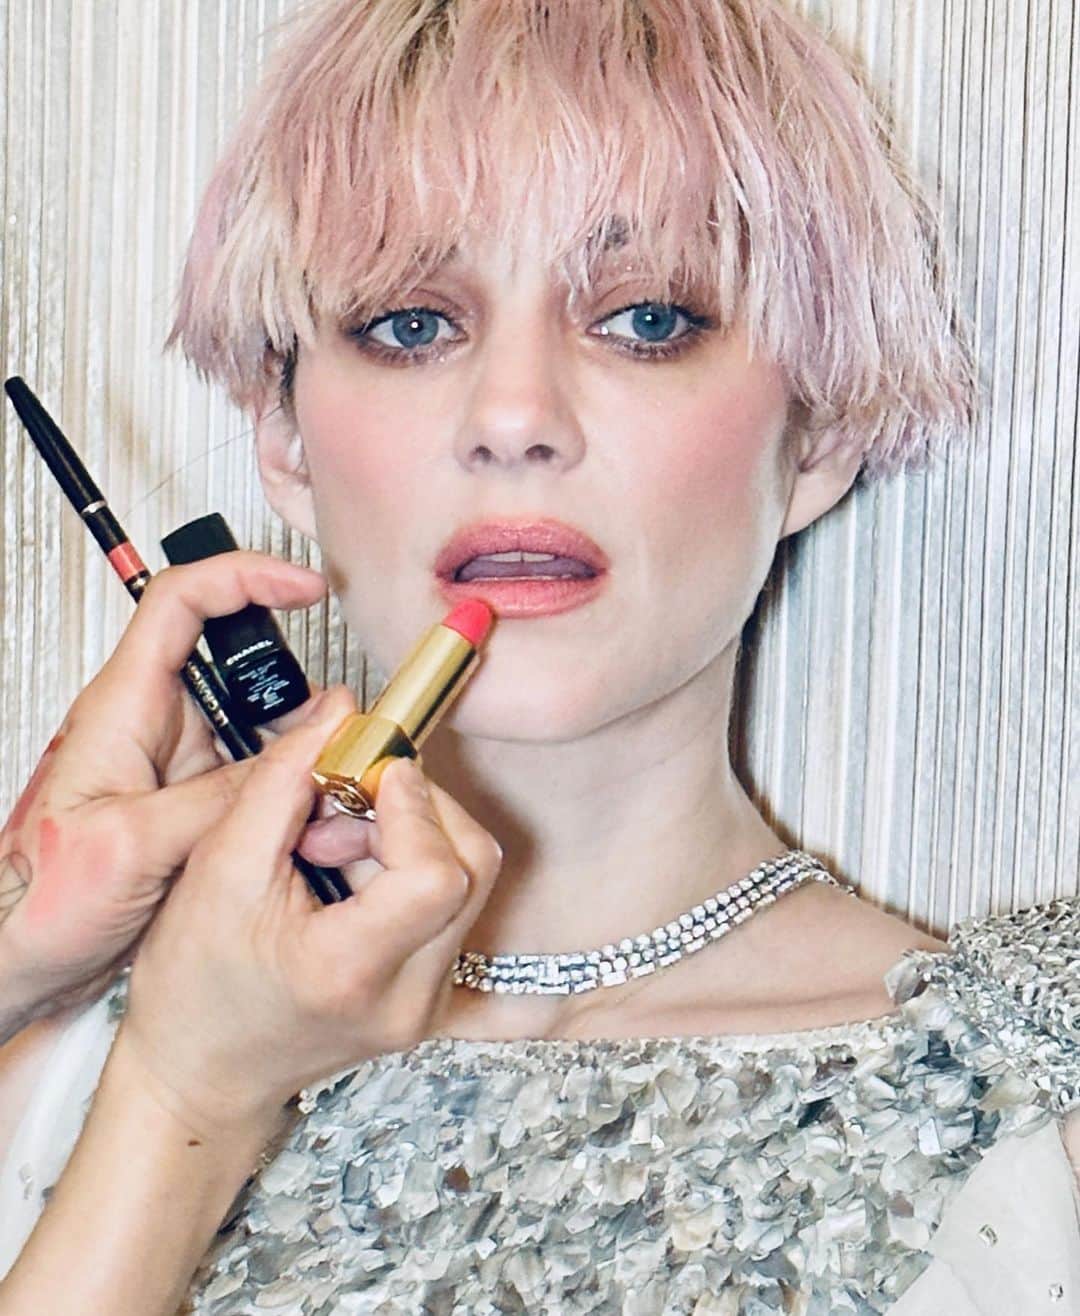 Kara Yoshimoto Buaのインスタグラム：「Magical Marion Cotillard x CHANEL in vintage Chanel for The MET GALA  @welovecoco @chanel.beauty #welovecoco #workingwithchanel #makeupbykarayoshimotobua  @hairbyadir nails @tombachik  @eliottbliss @marioncotillard LIPS:  Hydra Beauty Nourishing Lip Care Le crayon levres in Pivoine and Rose Poudre  Rouge Allure Velvet in La Favorite」